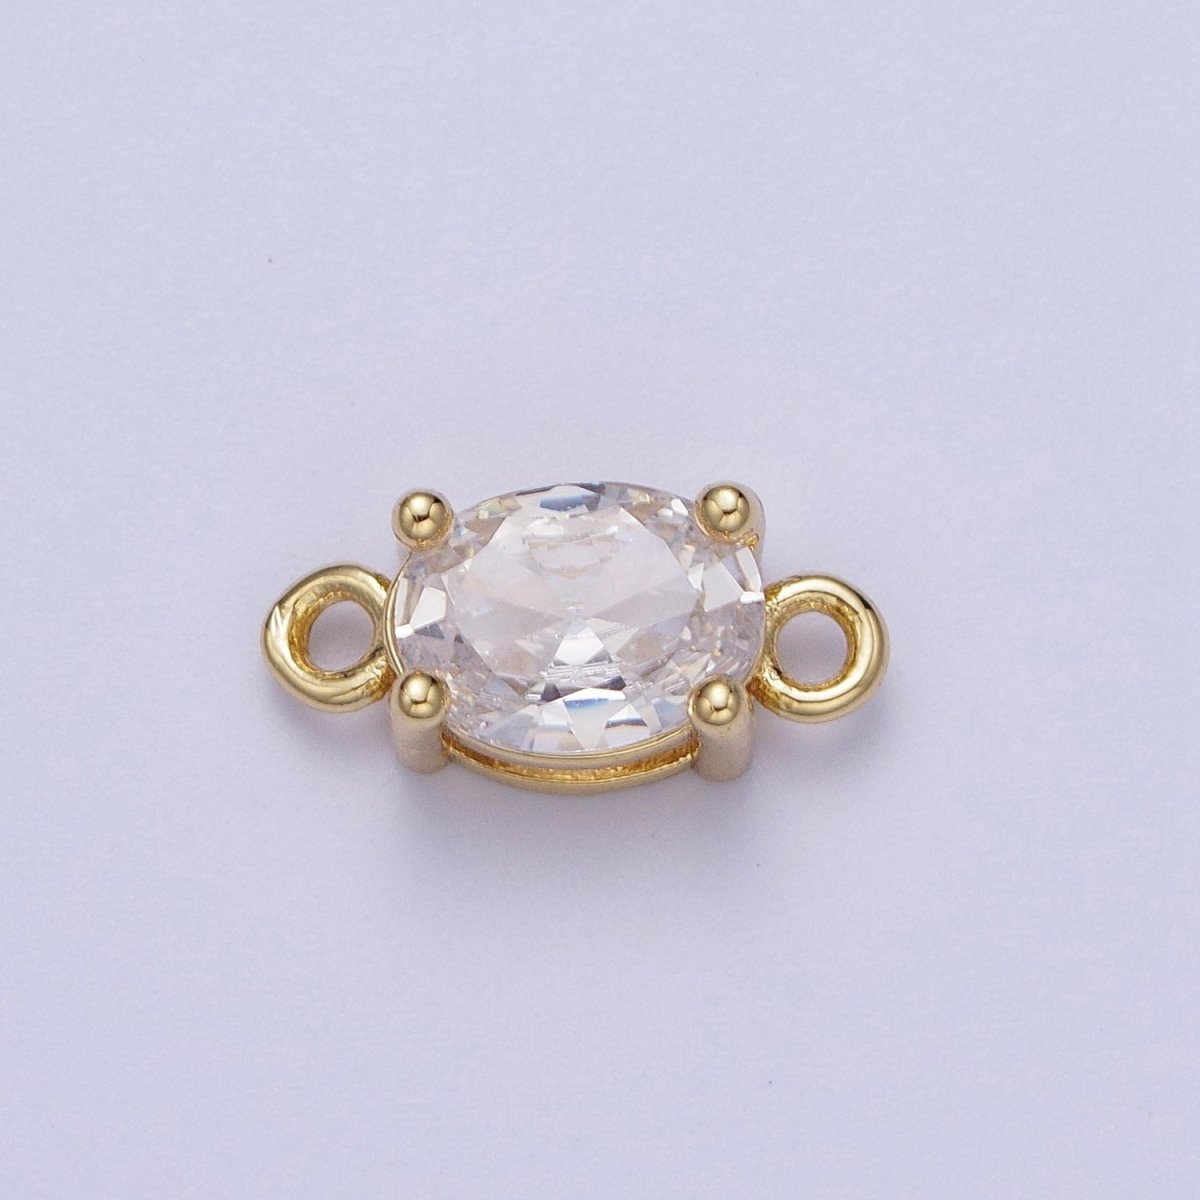 Mini Gold Oval Charm Connector for Necklace Bracelet Earring Link Connector Pink Clear CZ Stone Finding G-571 G-572 - DLUXCA